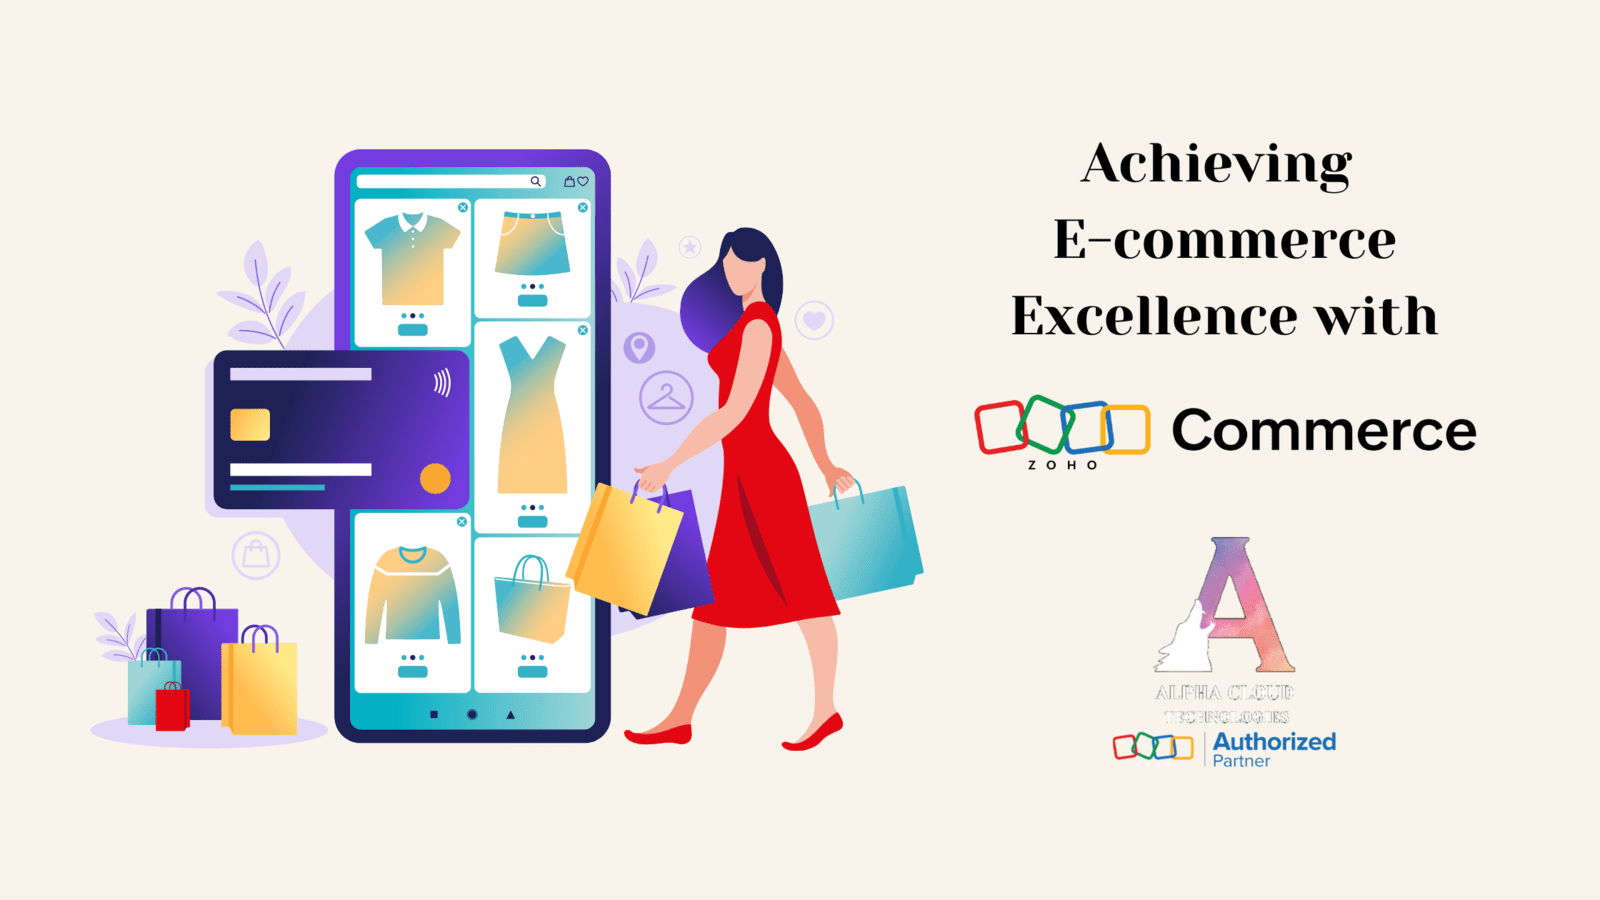 Achieving E-commerce Excellence with Zoho Commerce: Key Steps, Facts, and Tips for Success